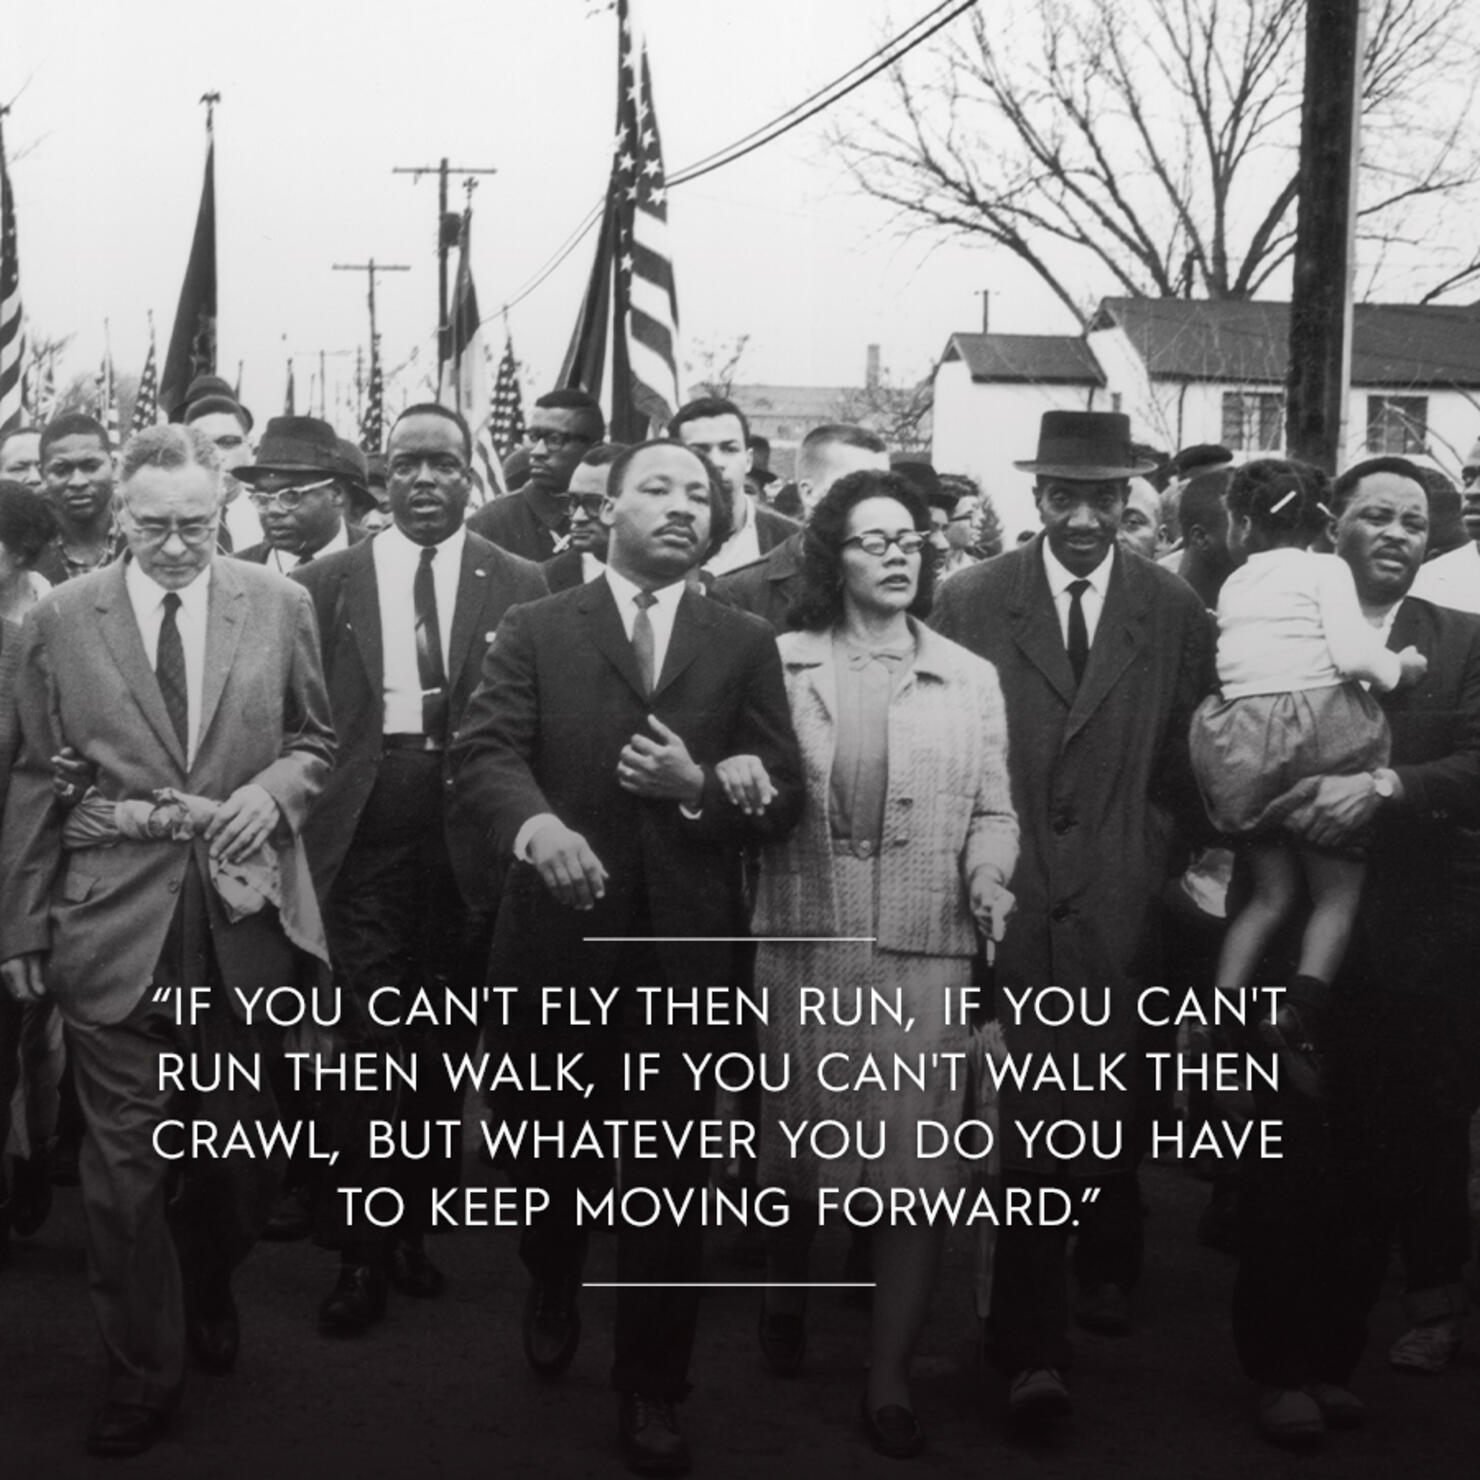  Martin Luther King Jr. MLK “If You Can't Fly Then Run, If You  Can't Run Then Walk, If You Can't Walk Then Crawl, but Whatever You Do You  Have to Keep